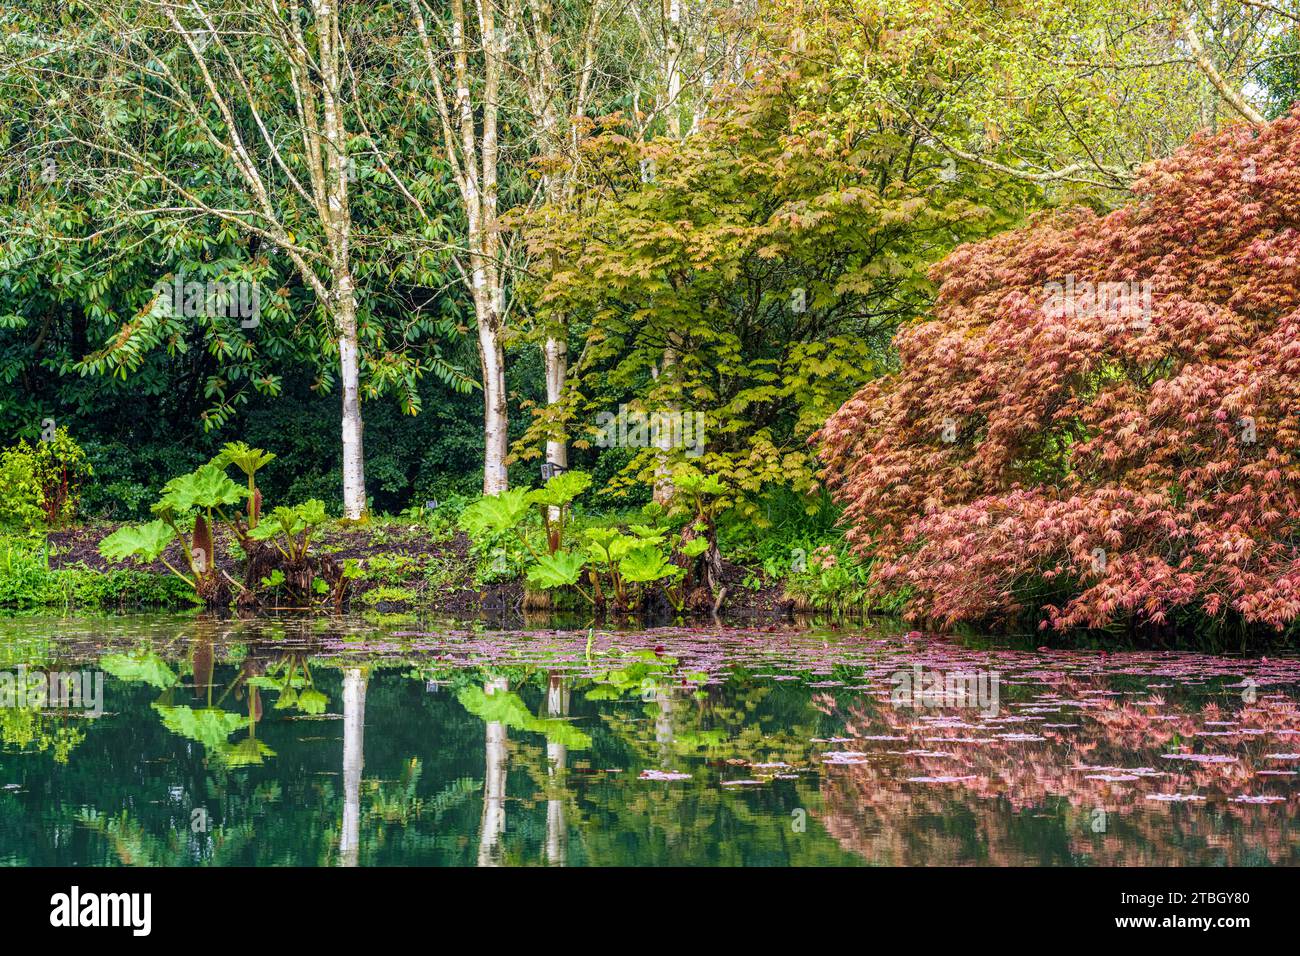 A beautiful garden feature on its own, the Lake serves as an irrigation reservoir for the Royal Horticultural Society Garden Rosemoor, Devon, UK. Stock Photo